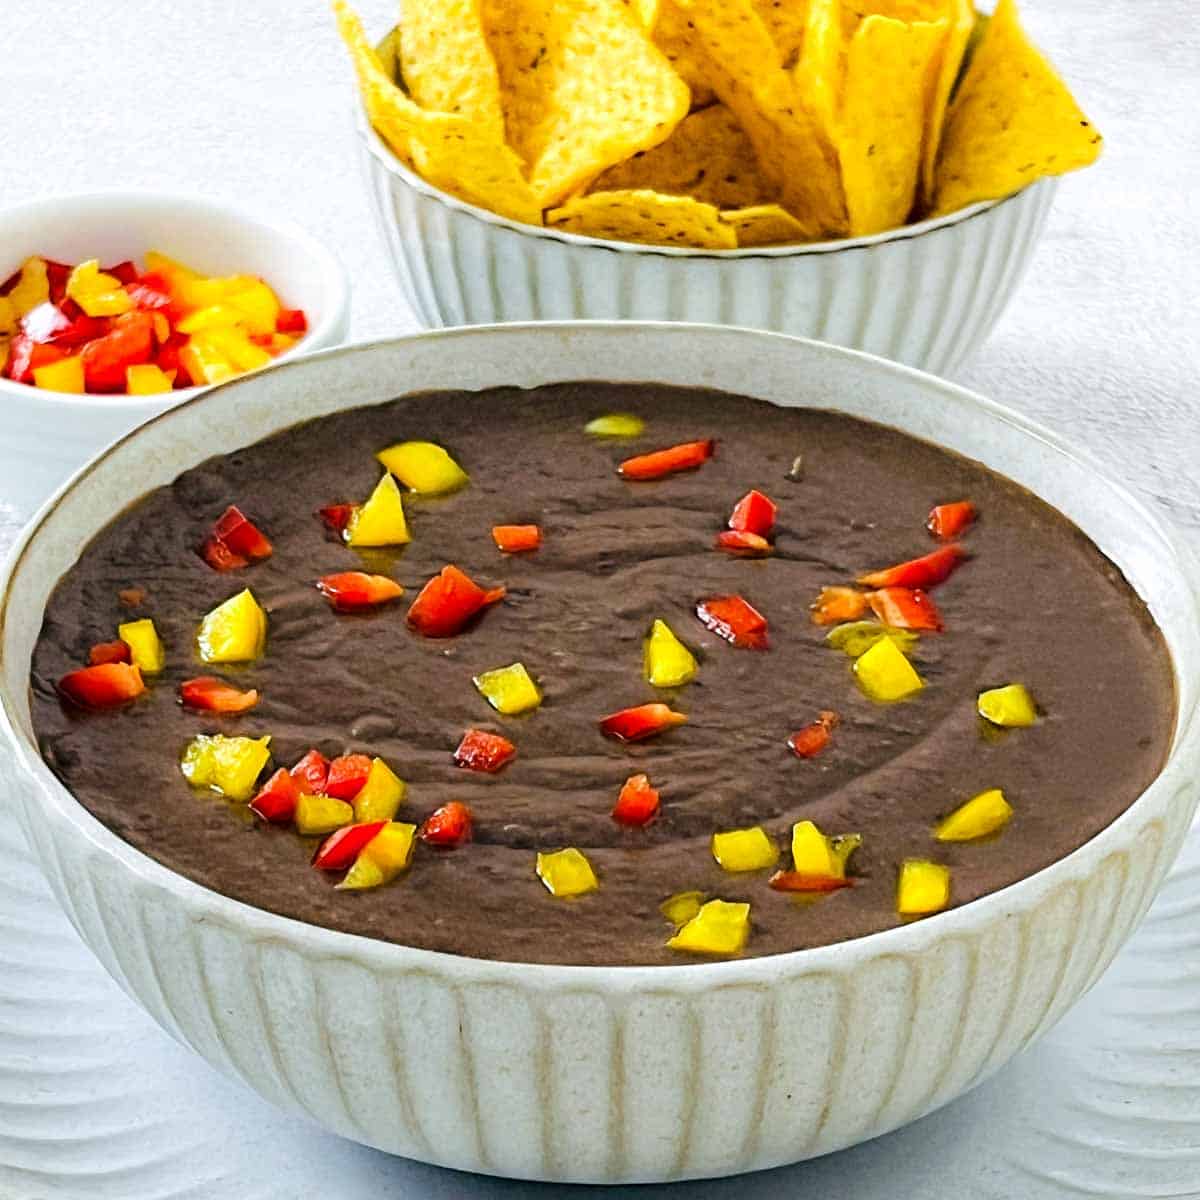 Refried beans in a white bowl with bell peppers and tortilla chips in the background.